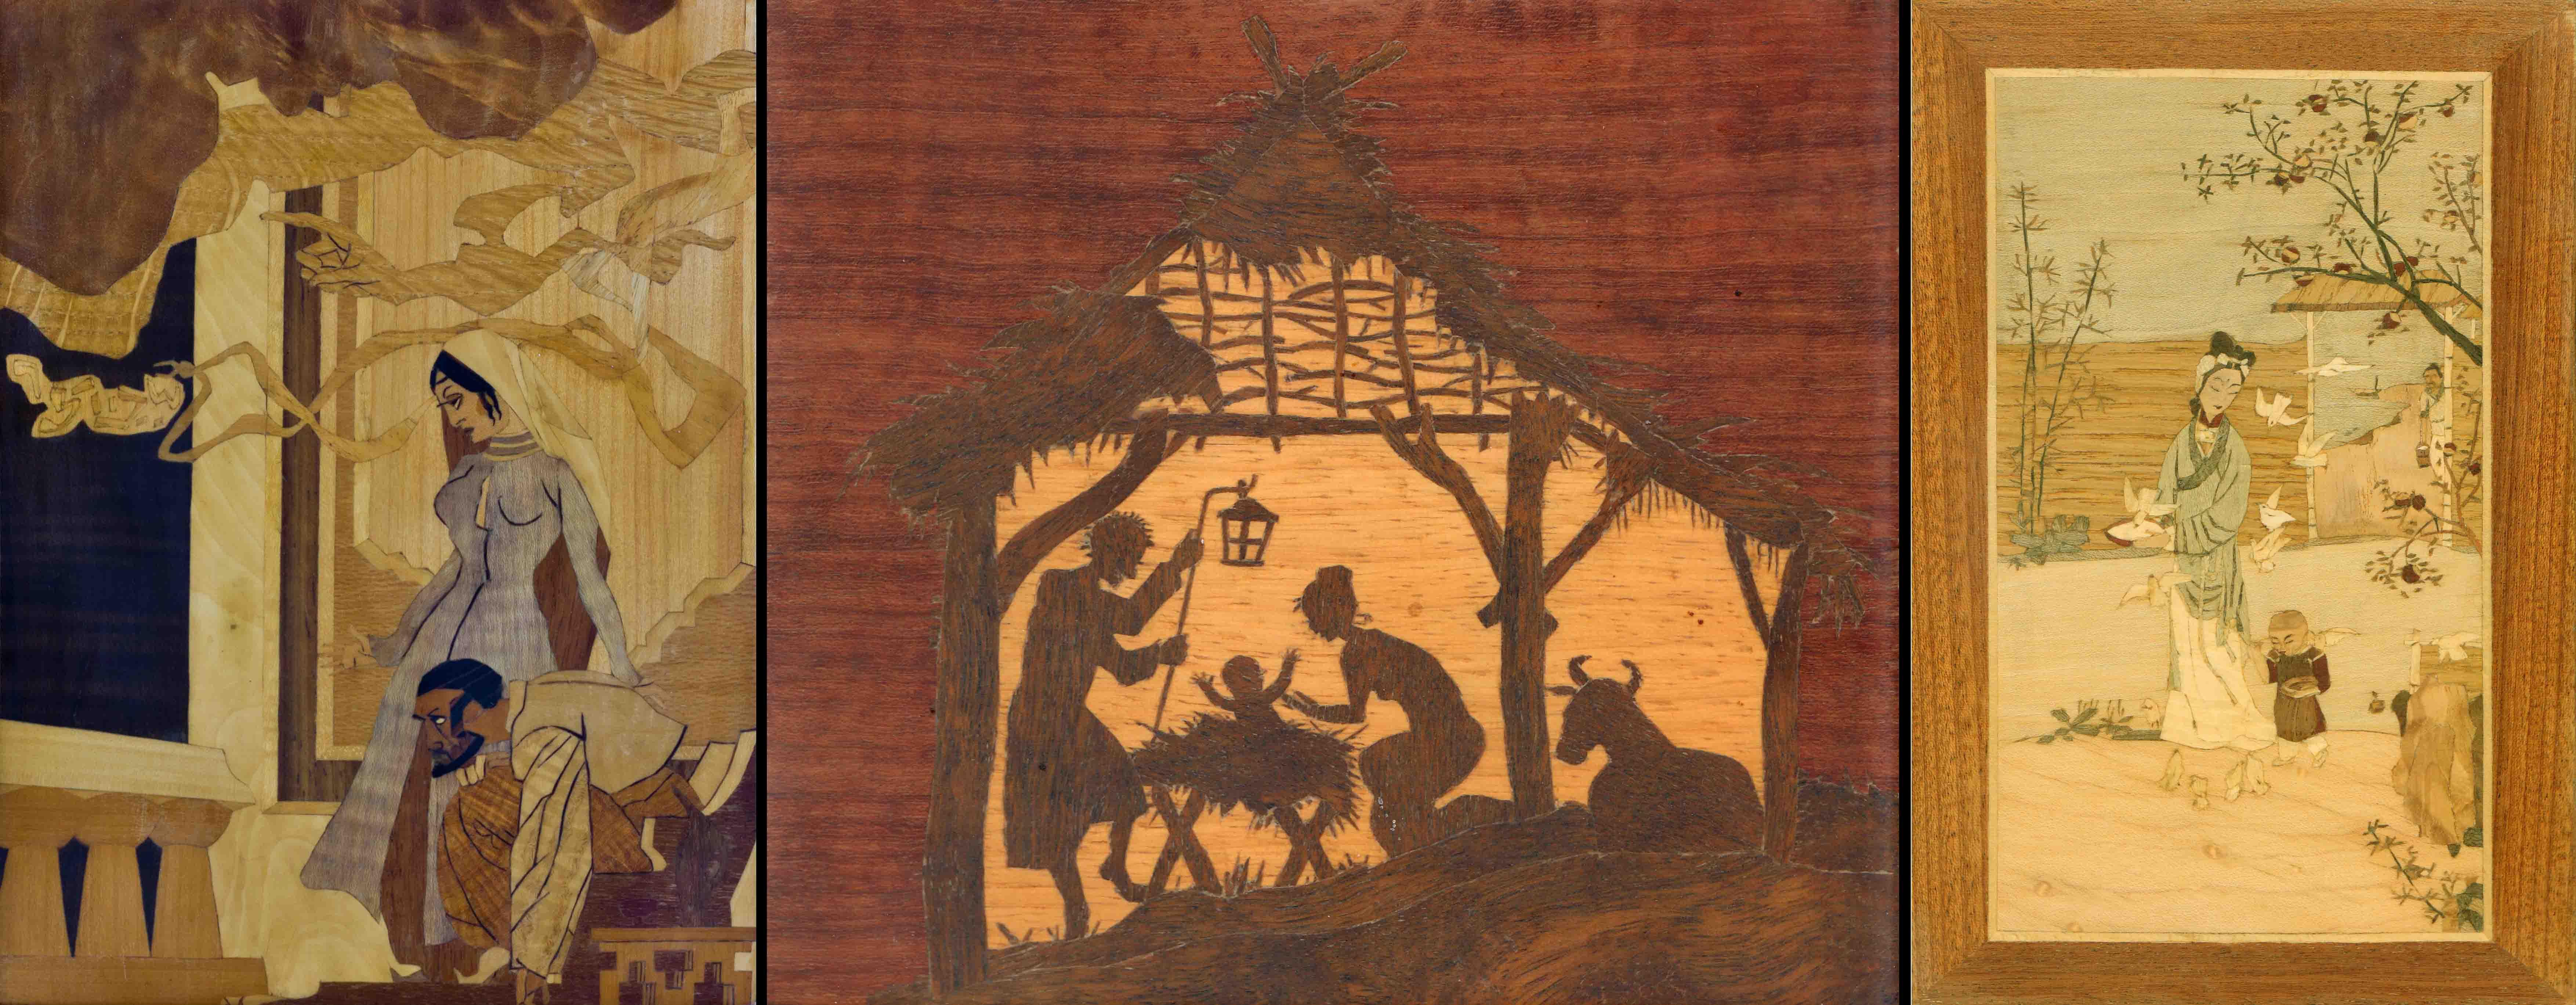 The Marquetry Shack